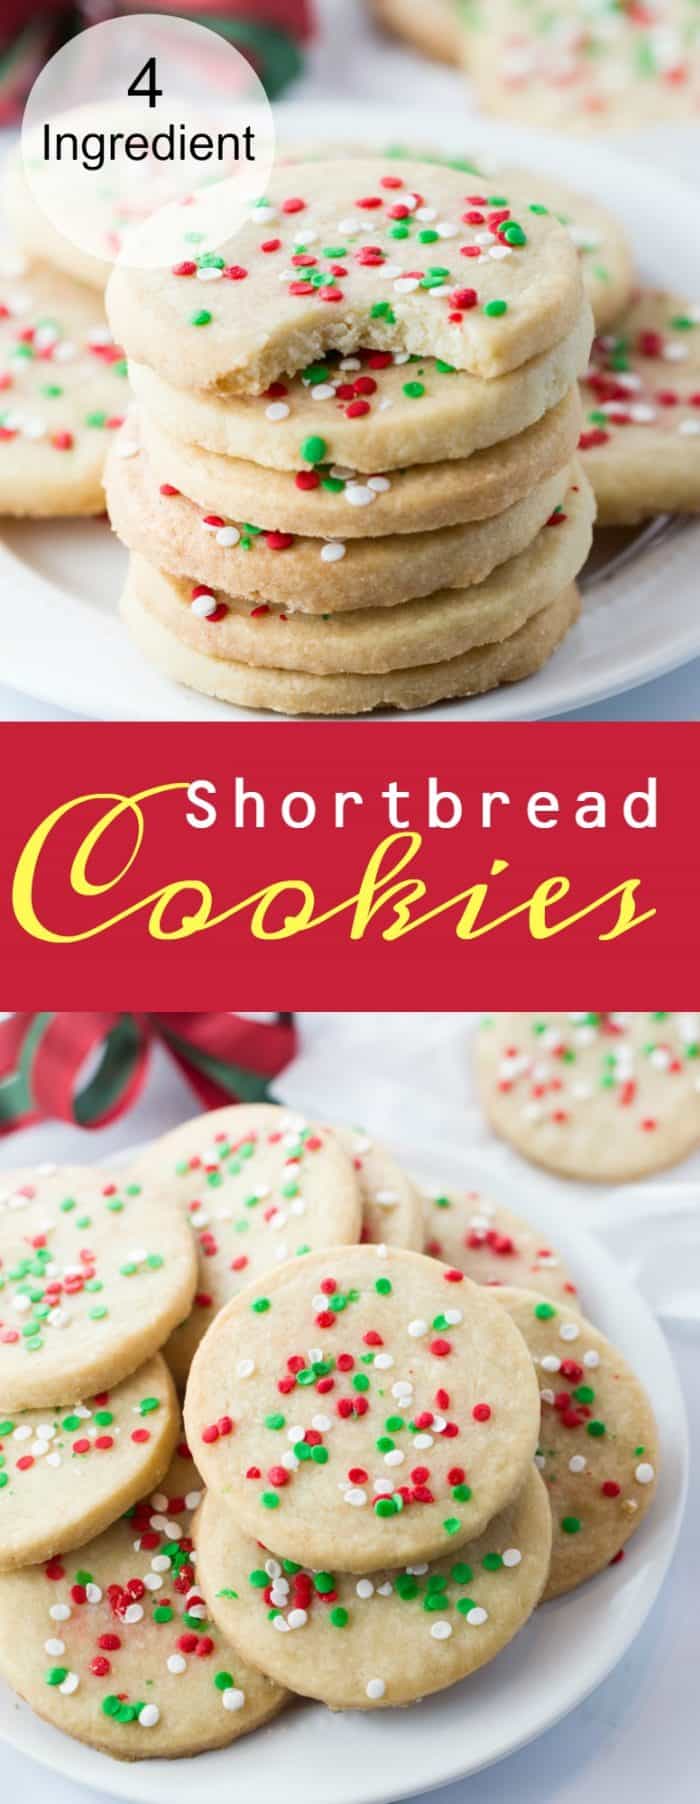 These soft, sweet, and buttery shortbread cookies only require 4 ingredients to make and are a classic holiday treat. #christmascookies #cookie #christmas #dessert #shortbread #holidays #sprinkles